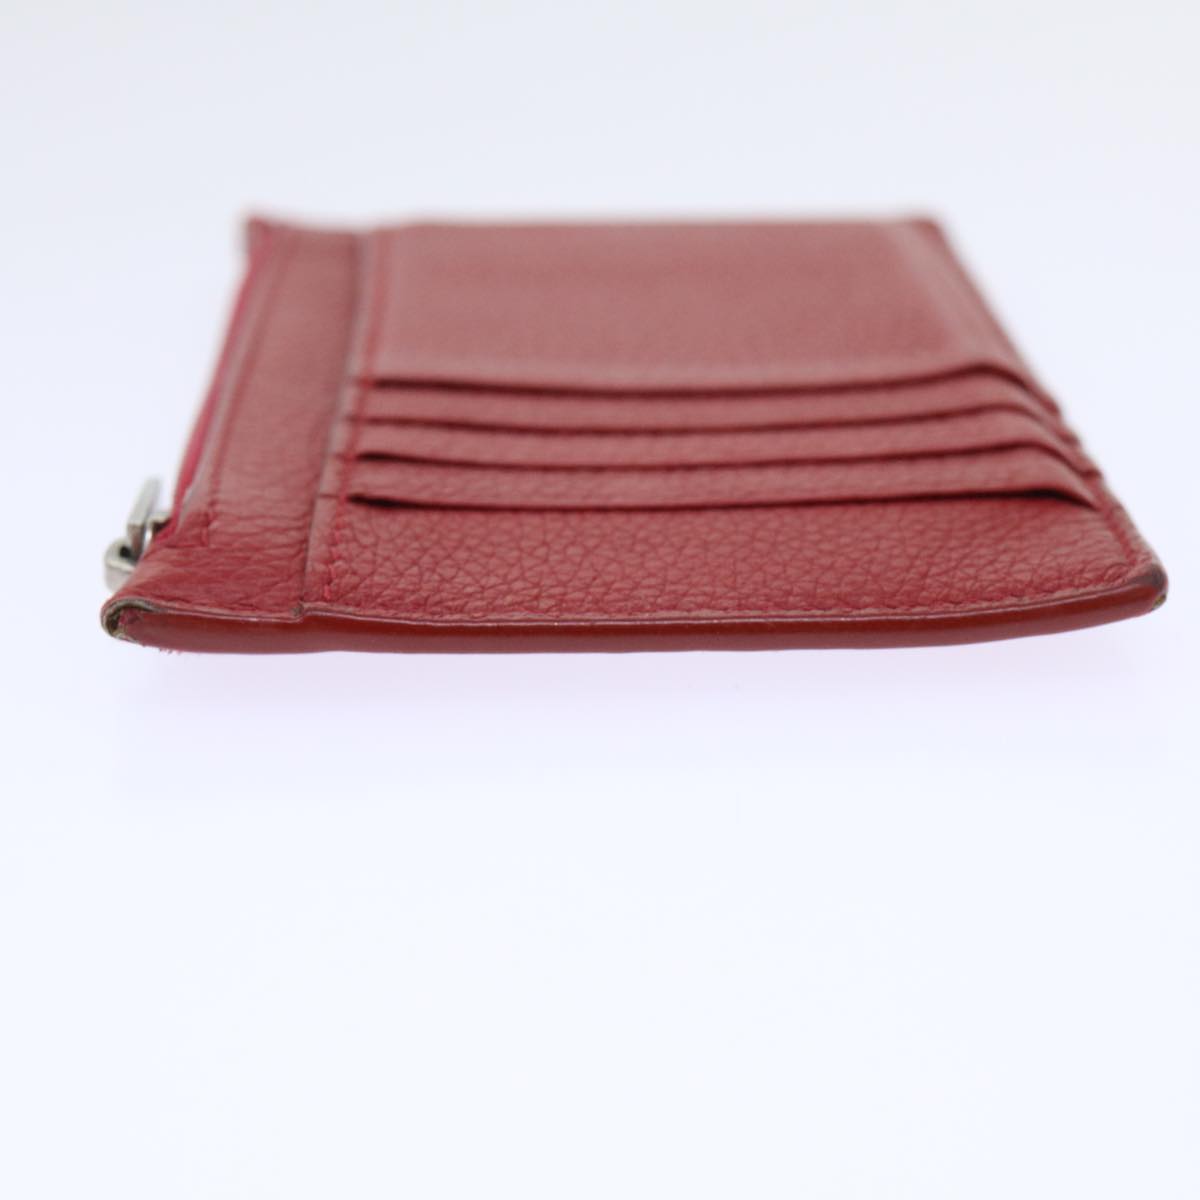 CELINE Coin Purse Leather Red Auth 50848